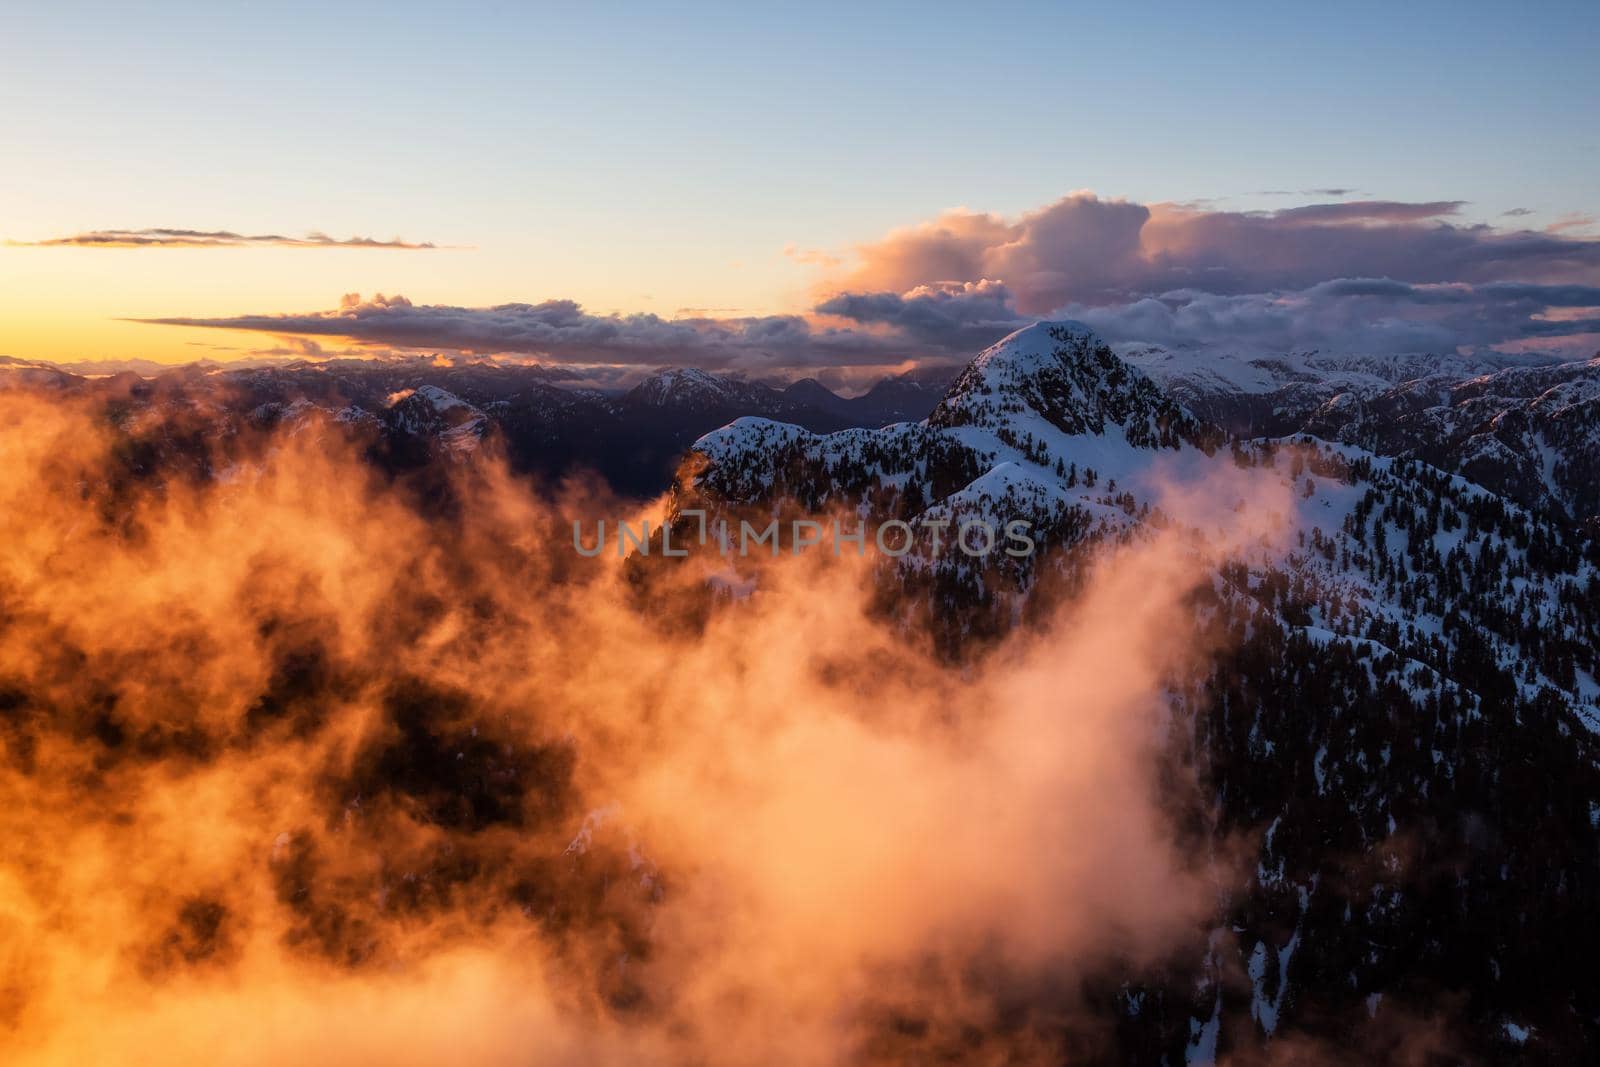 Surreal Aerial Landscape Photograph of Coquitlam Mountain by edb3_16